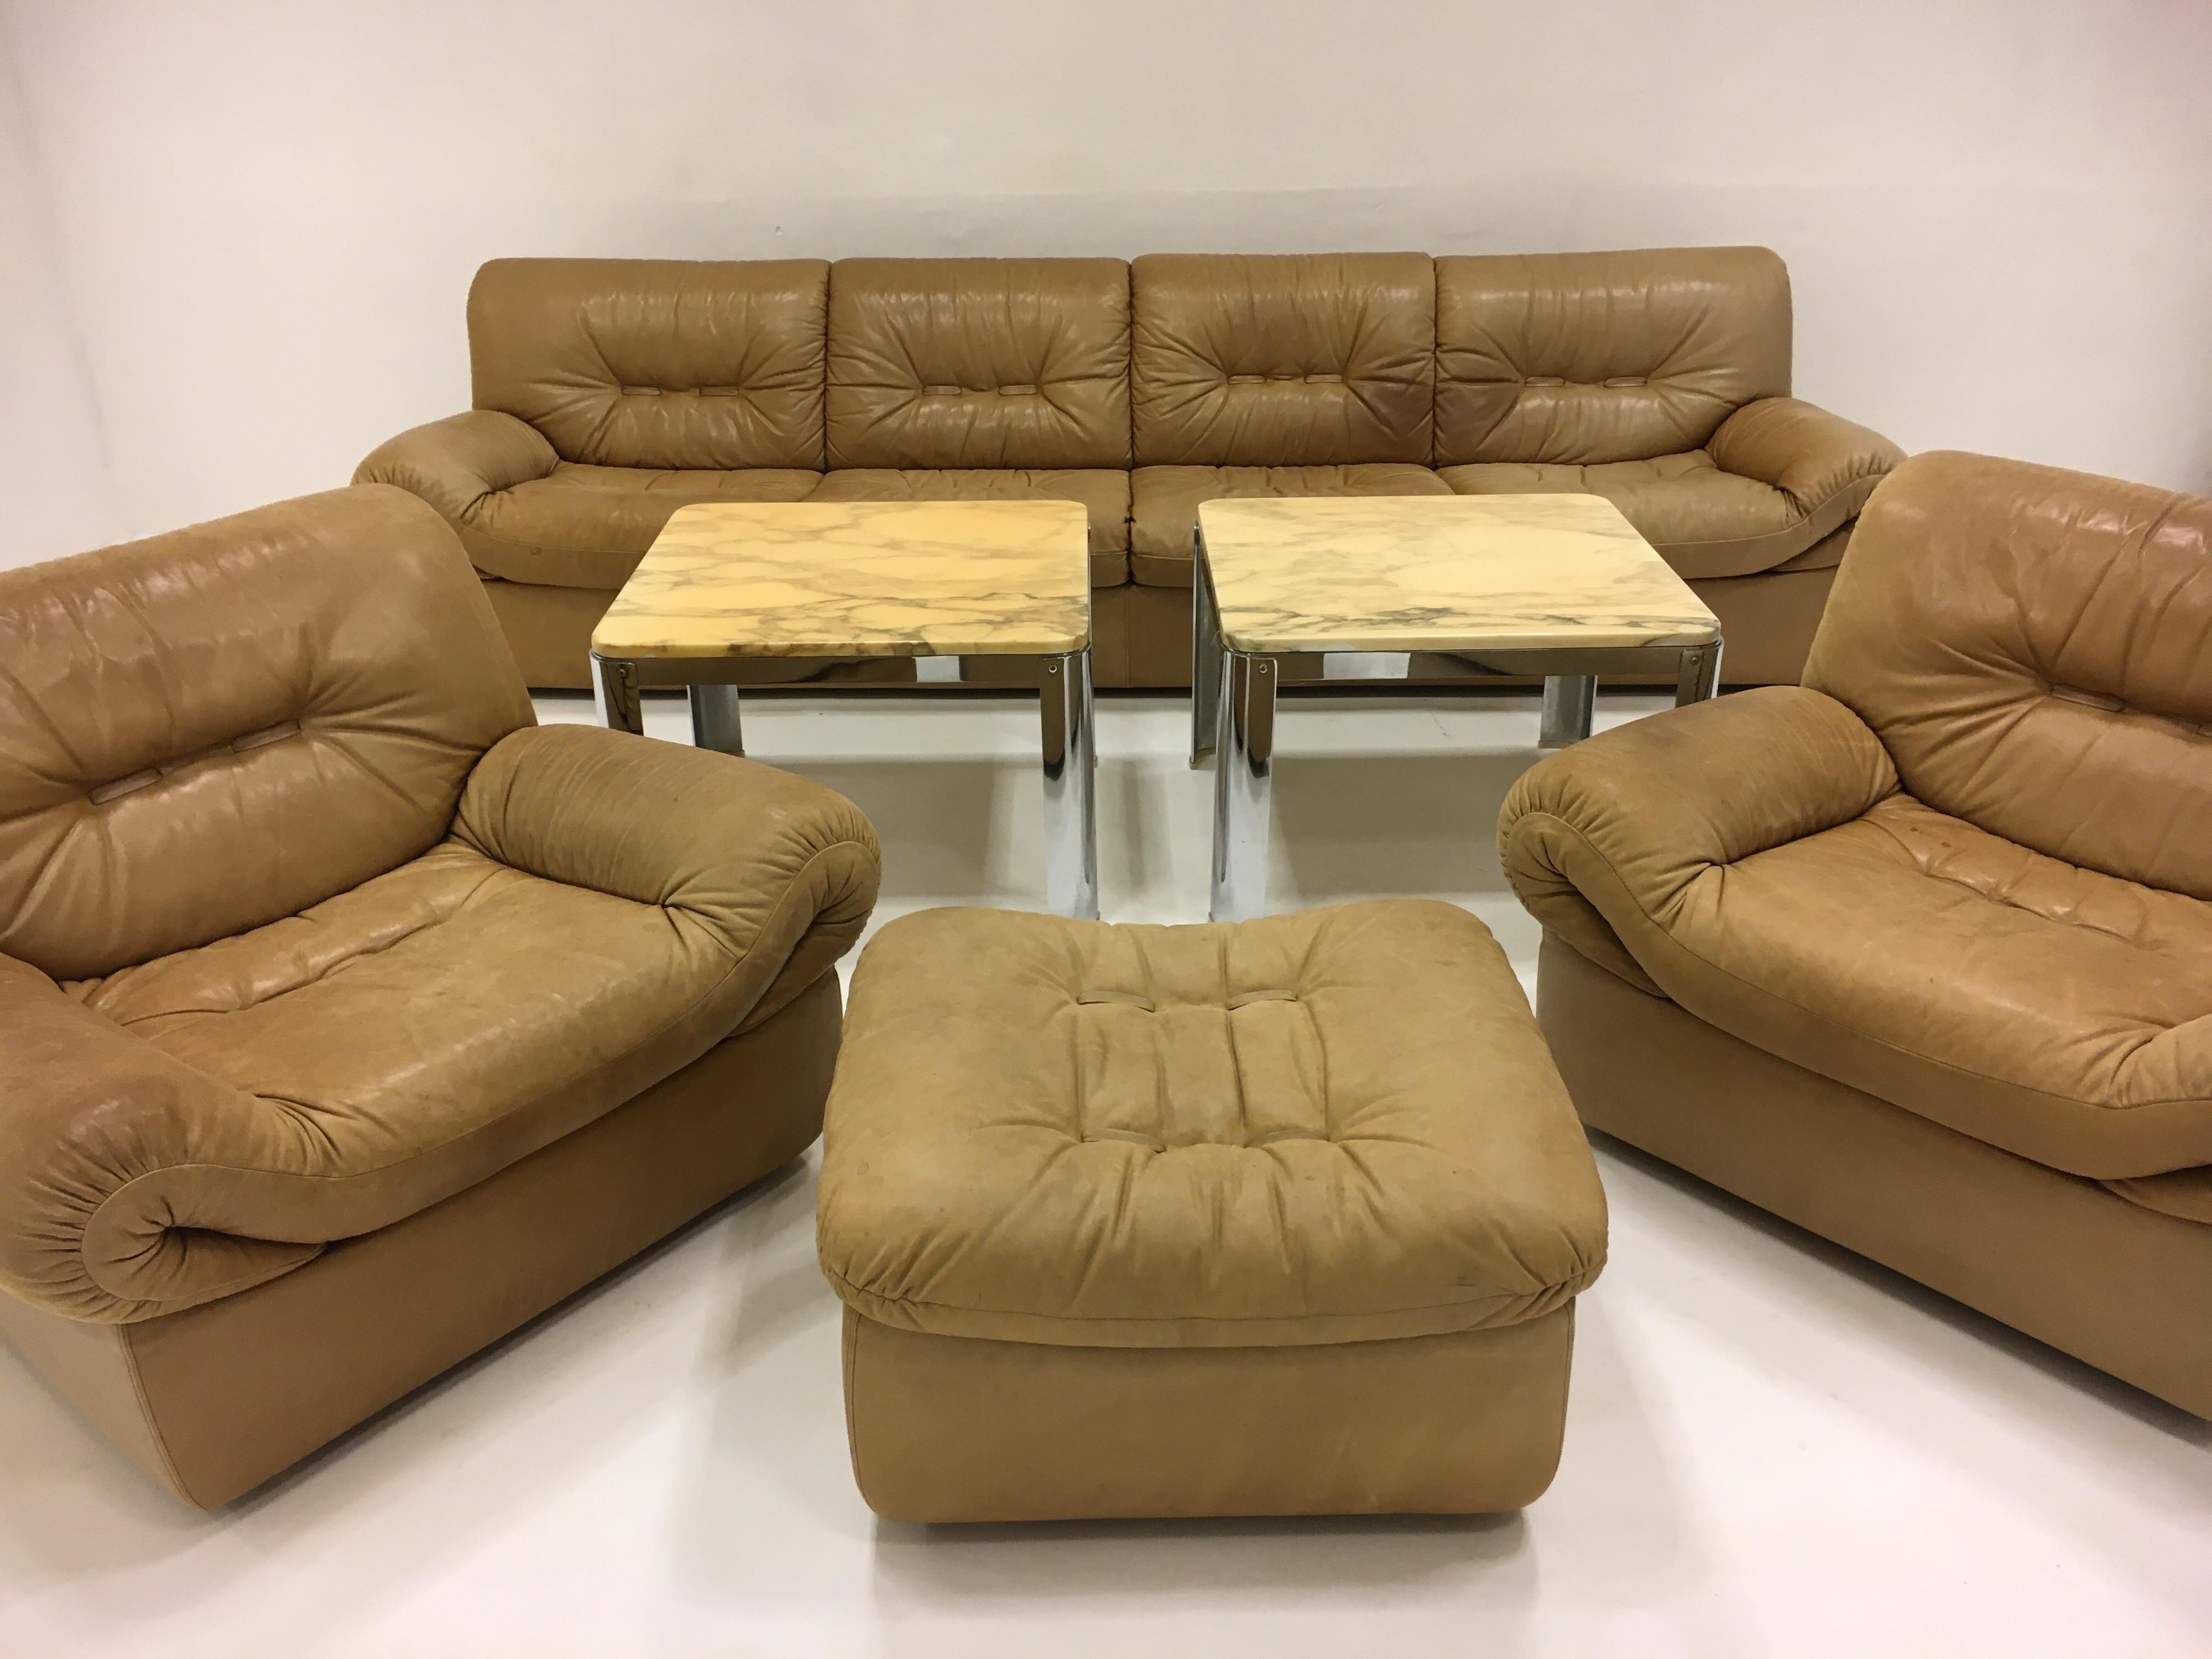 Wittmann, Model 'Chairman' Sofa Suite Living Room Set, Patinated Leather, 1971 In Good Condition For Sale In Vienna, AT